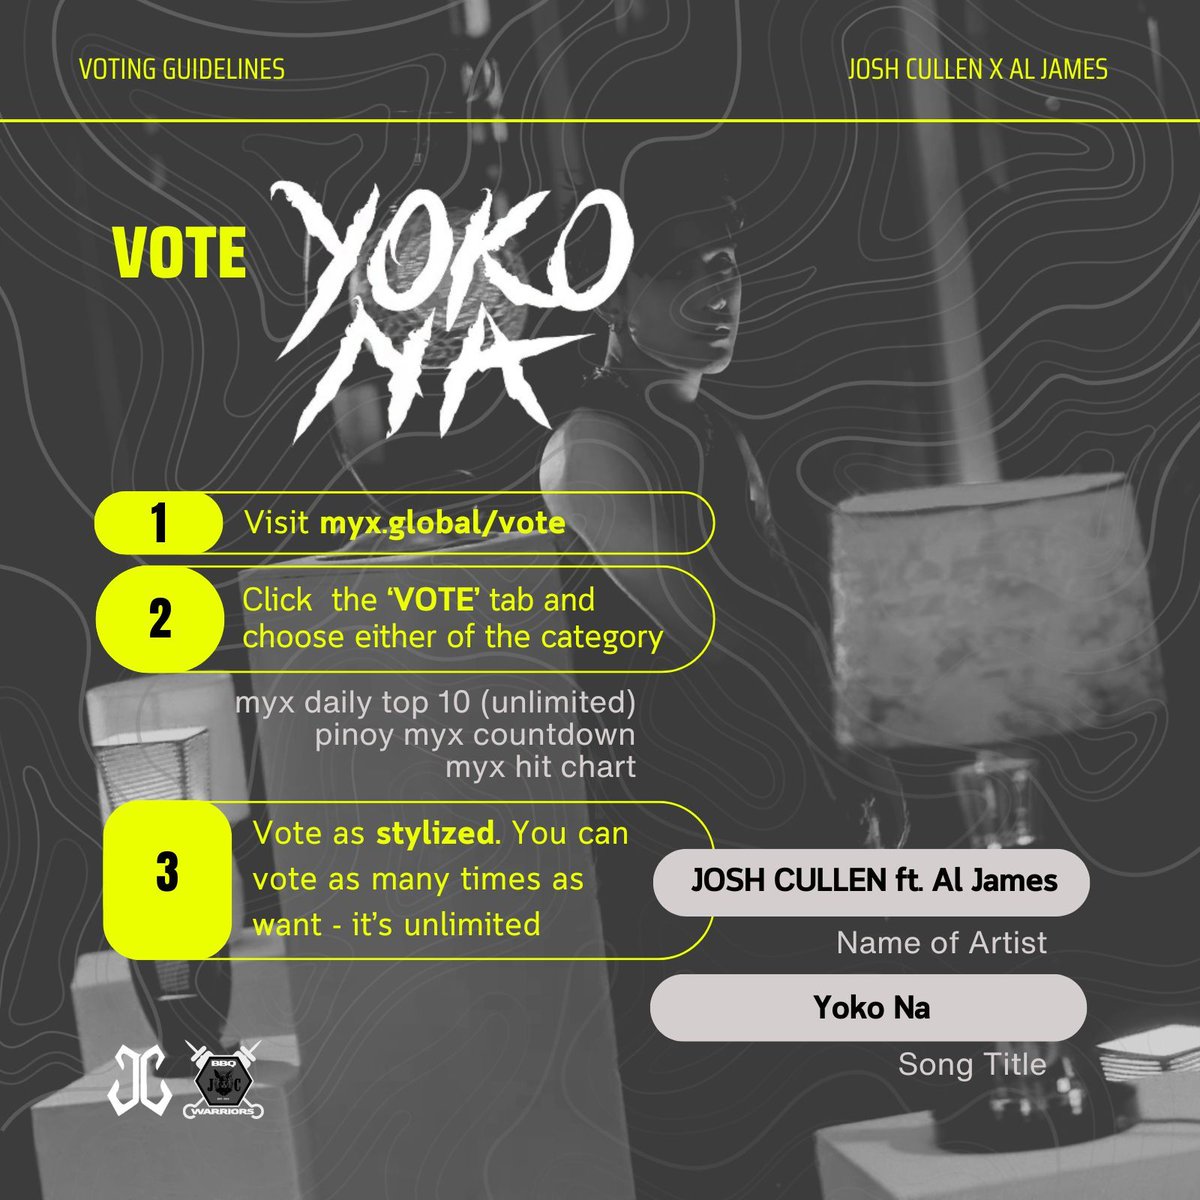 Cast your vote for #YOKONA by #JOSHCULLENxALJAMES on MYX! See links below:

DAILY TOP 10
buff.ly/3U5KpBc

HIT CHART
buff.ly/3UeAZSI 

PINOY COUNTDOWN
buff.ly/3U9hLzm

Name of Artist: JOSH CULLEN ft. Al James
Title of Song: Yoko Na
(Vote as stylized)